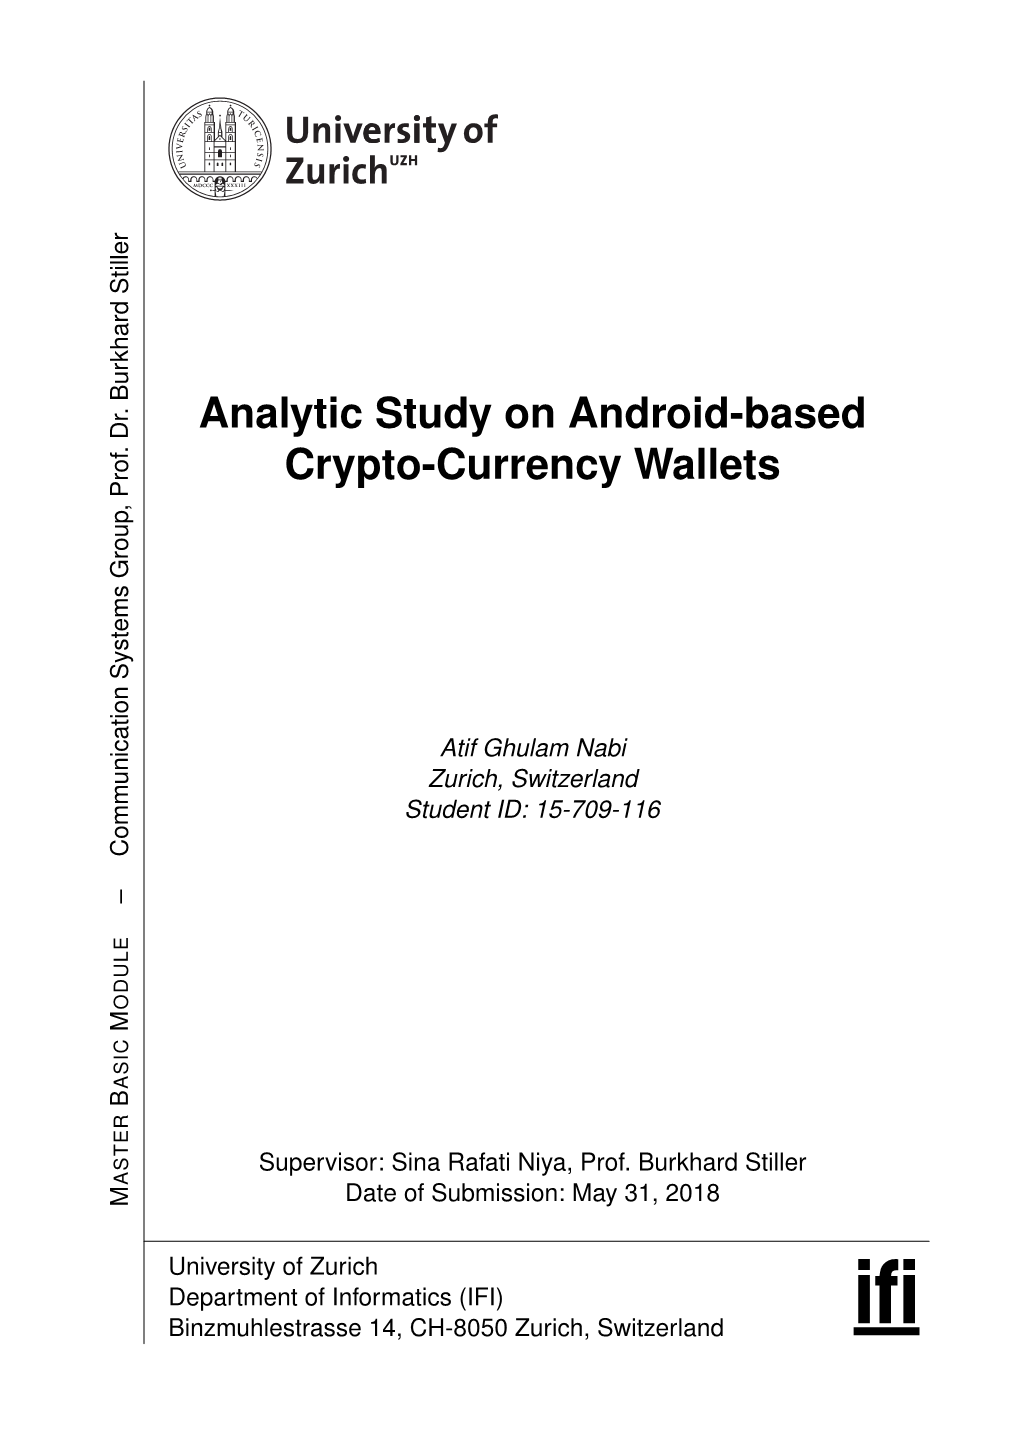 Analytic Study on Android-Based Crypto-Currency Wallets